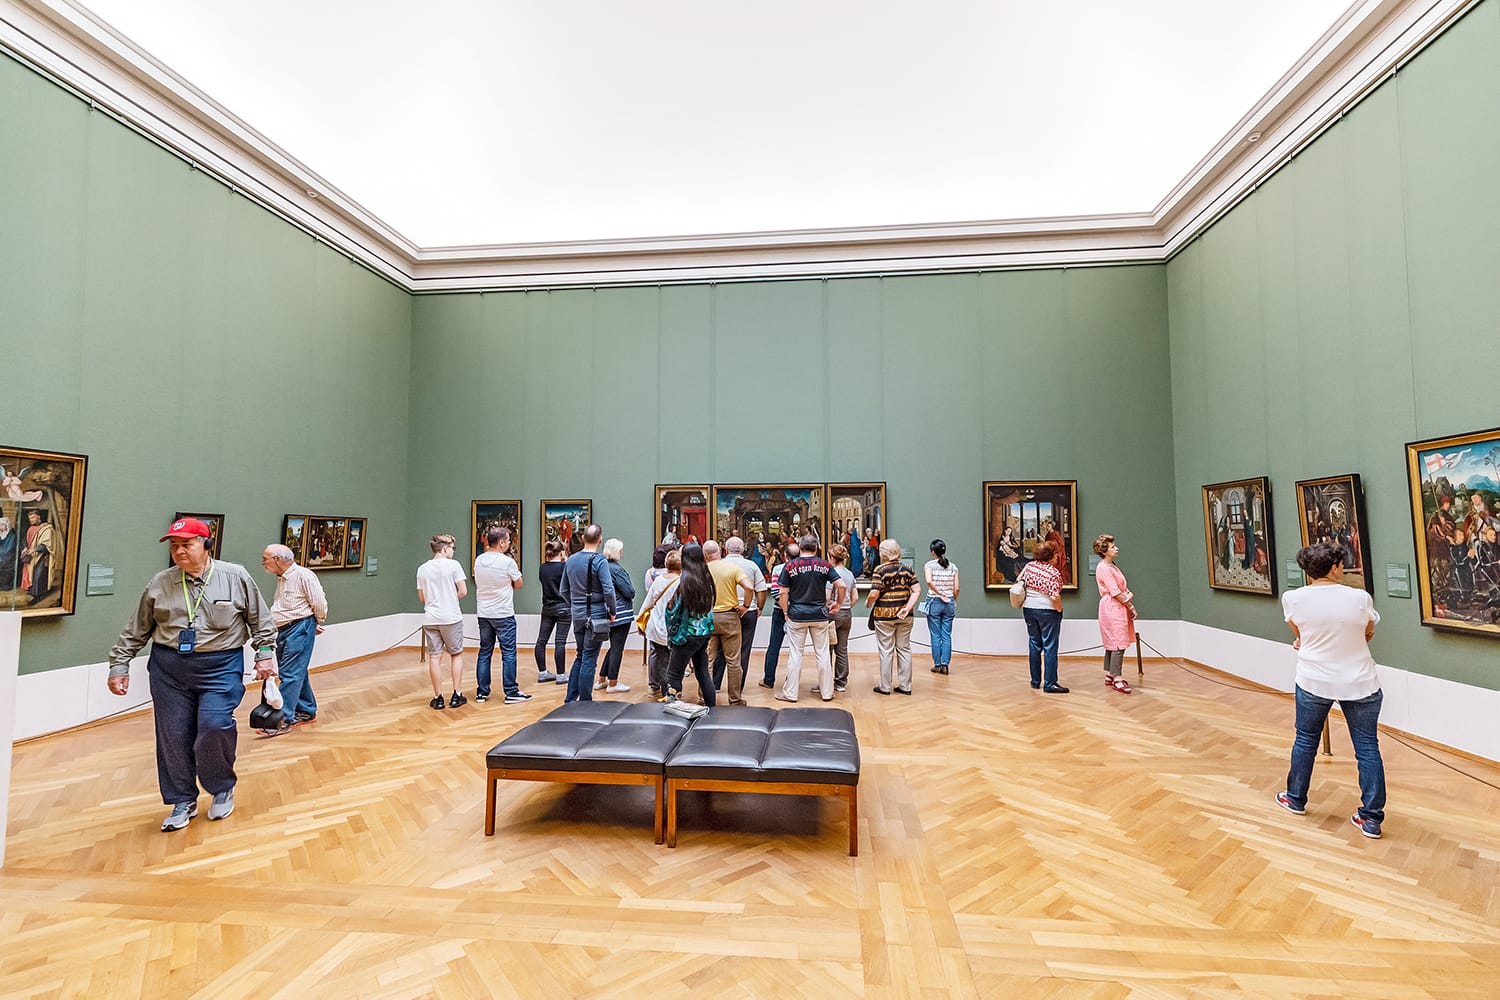 Visitors to the old Pinakothek in Munich admire the paintings of the great masters of antiquity